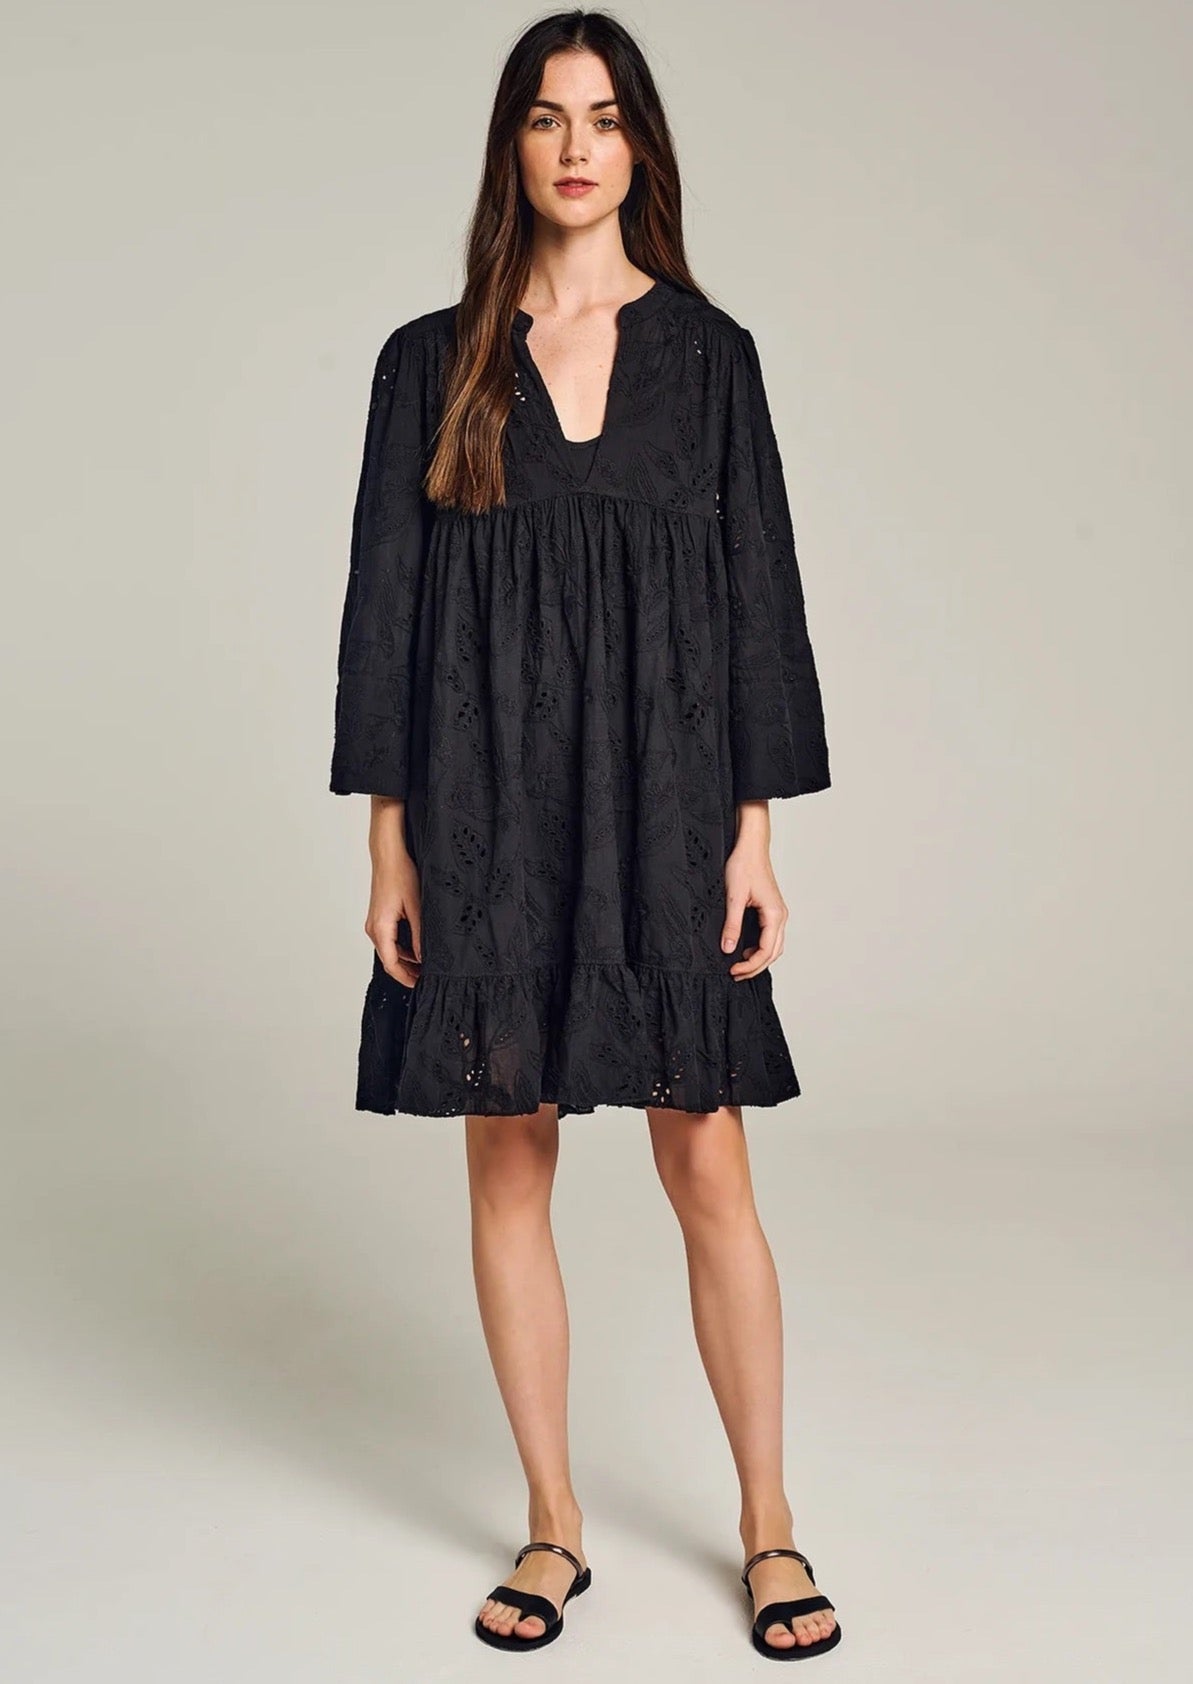 Devotion Symi Dress - Black  For an effortless summer look, choose the Symi Dress from resort wear designer Devotion. Crafted in broderie anglaise cotton, it's the perfect addition to your summer wardrobe.  Details:  V-neck Mini length  All-over embroidery  Side pockets Ruffled hemline